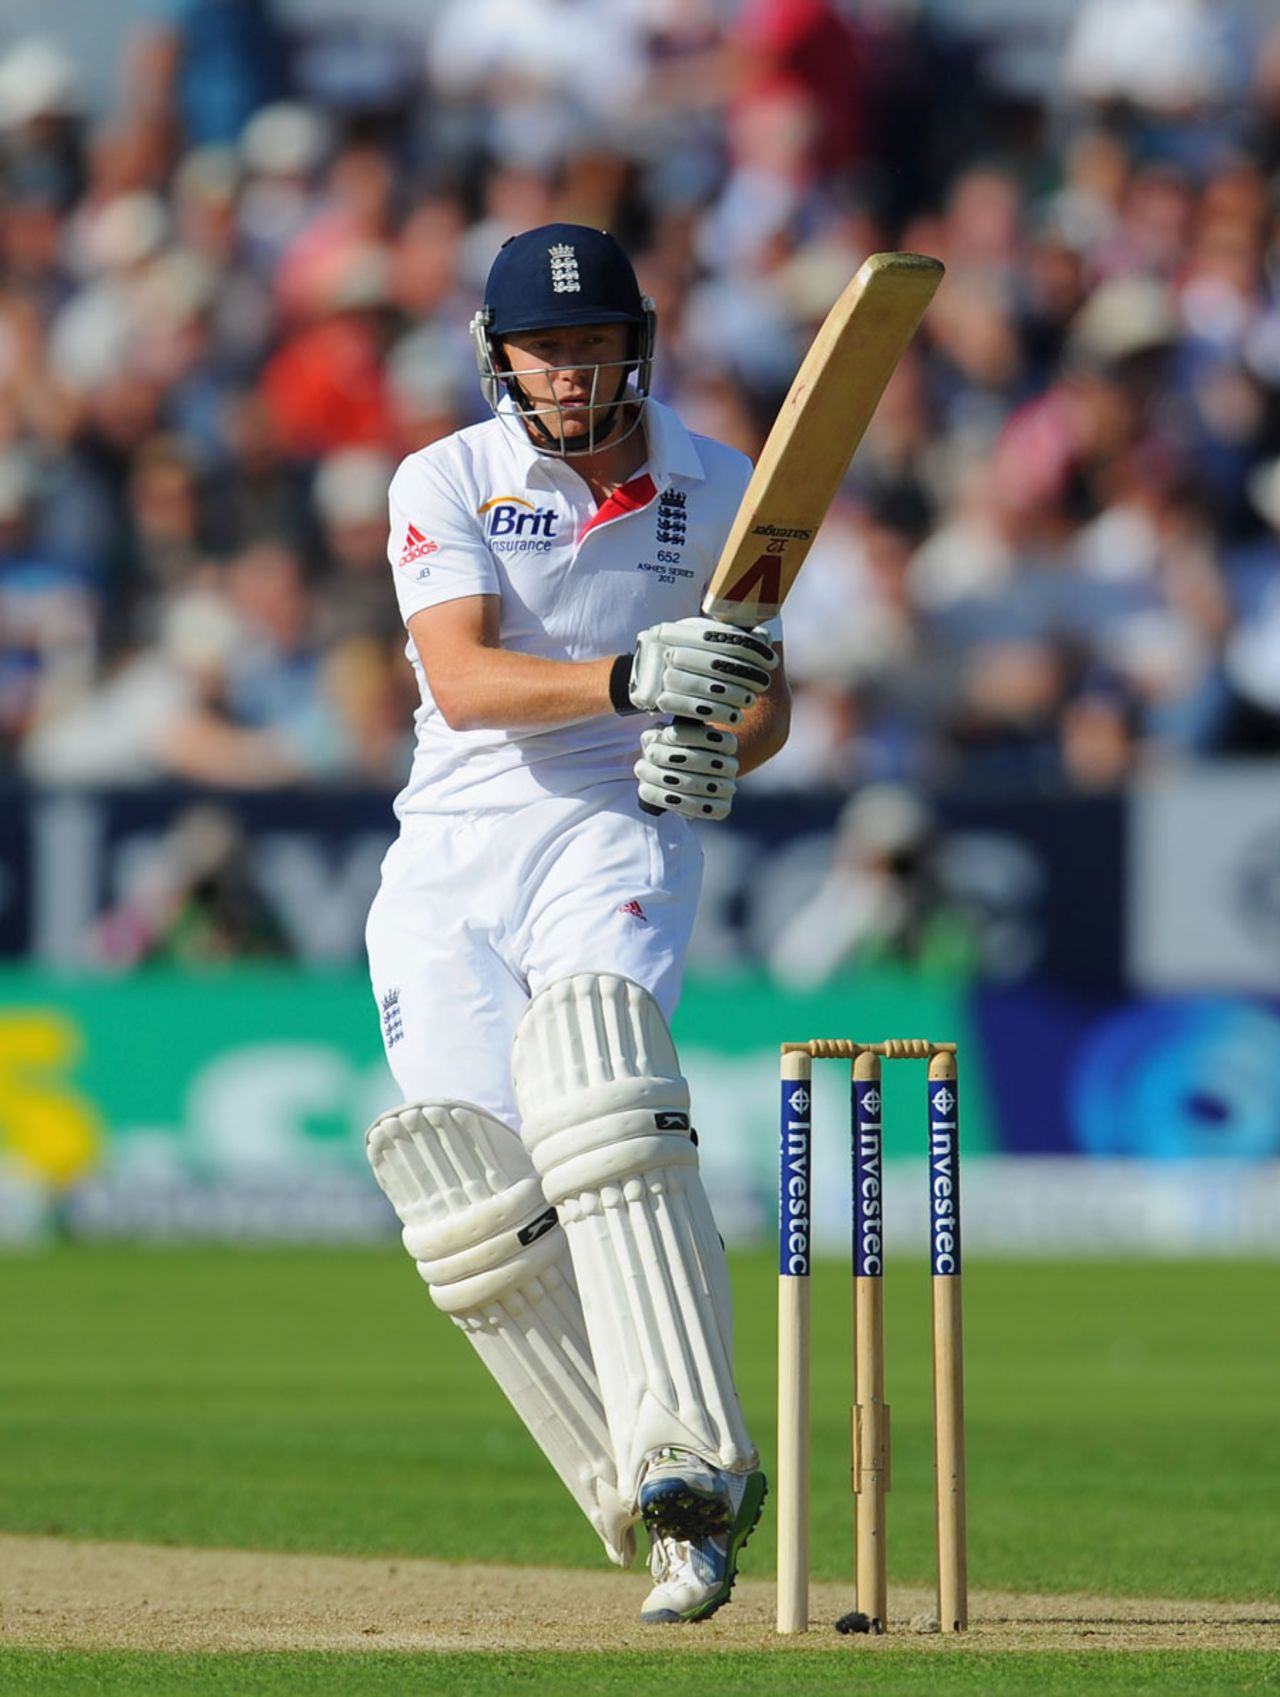 Jonny Bairstow faced 77 balls for his 14, England v Australia, 4th Investec Ashes Test, Chester-le-Street, 1st day, August 9, 2013